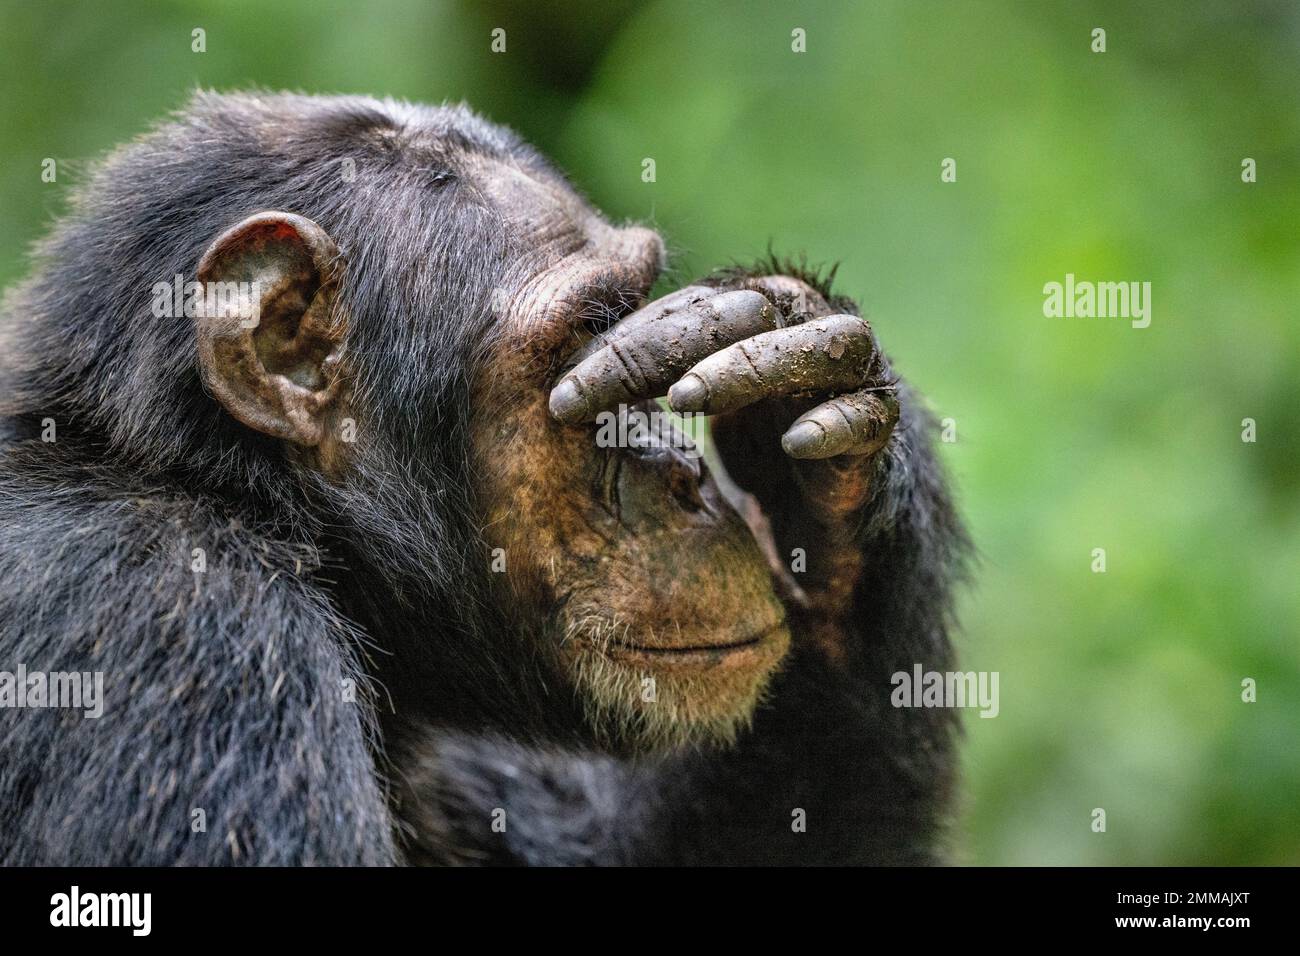 A chimpanzee appears to cover it's eyes with it's hand, sitting low down amongst the rainforest.  Image captured in Kibale rainforest, western Uganda. Stock Photo